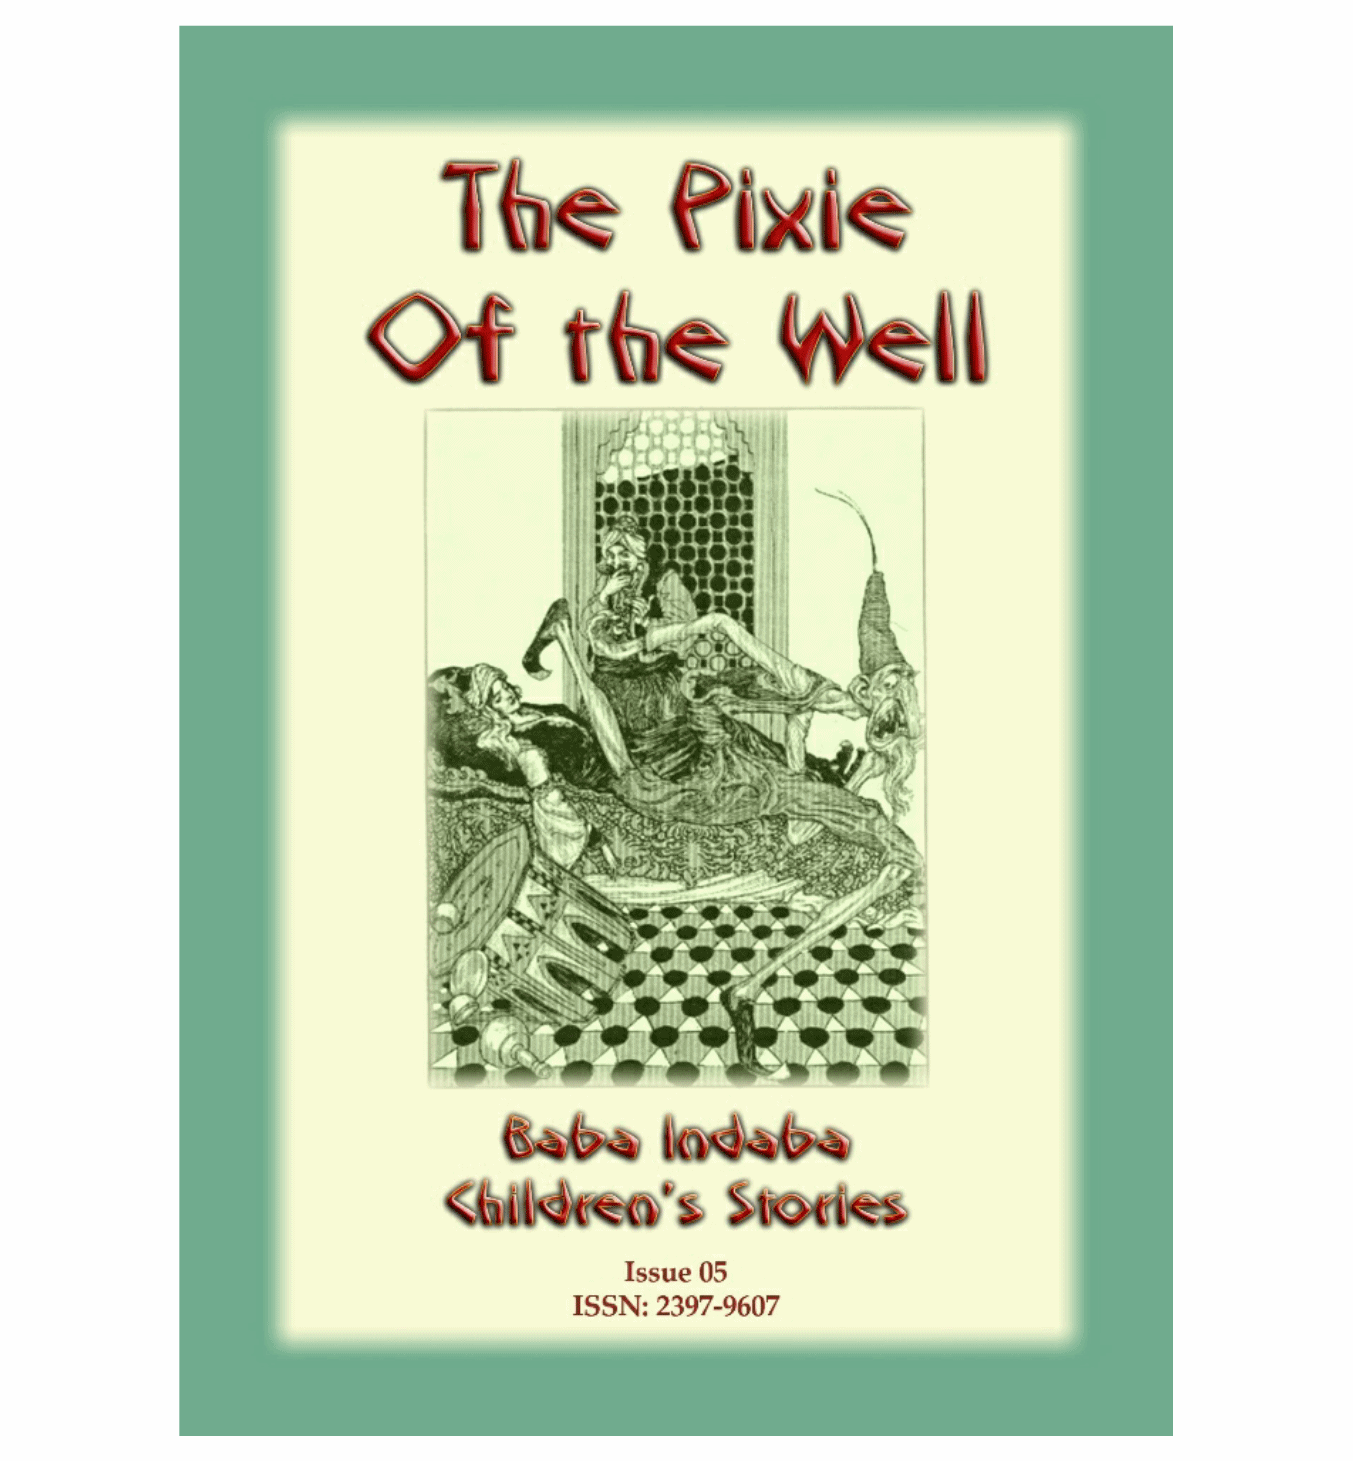 THE PIXIE OF THE WELL - A Turkish Fairy Tale: Baba Indaba Children's Stories Issue 05 